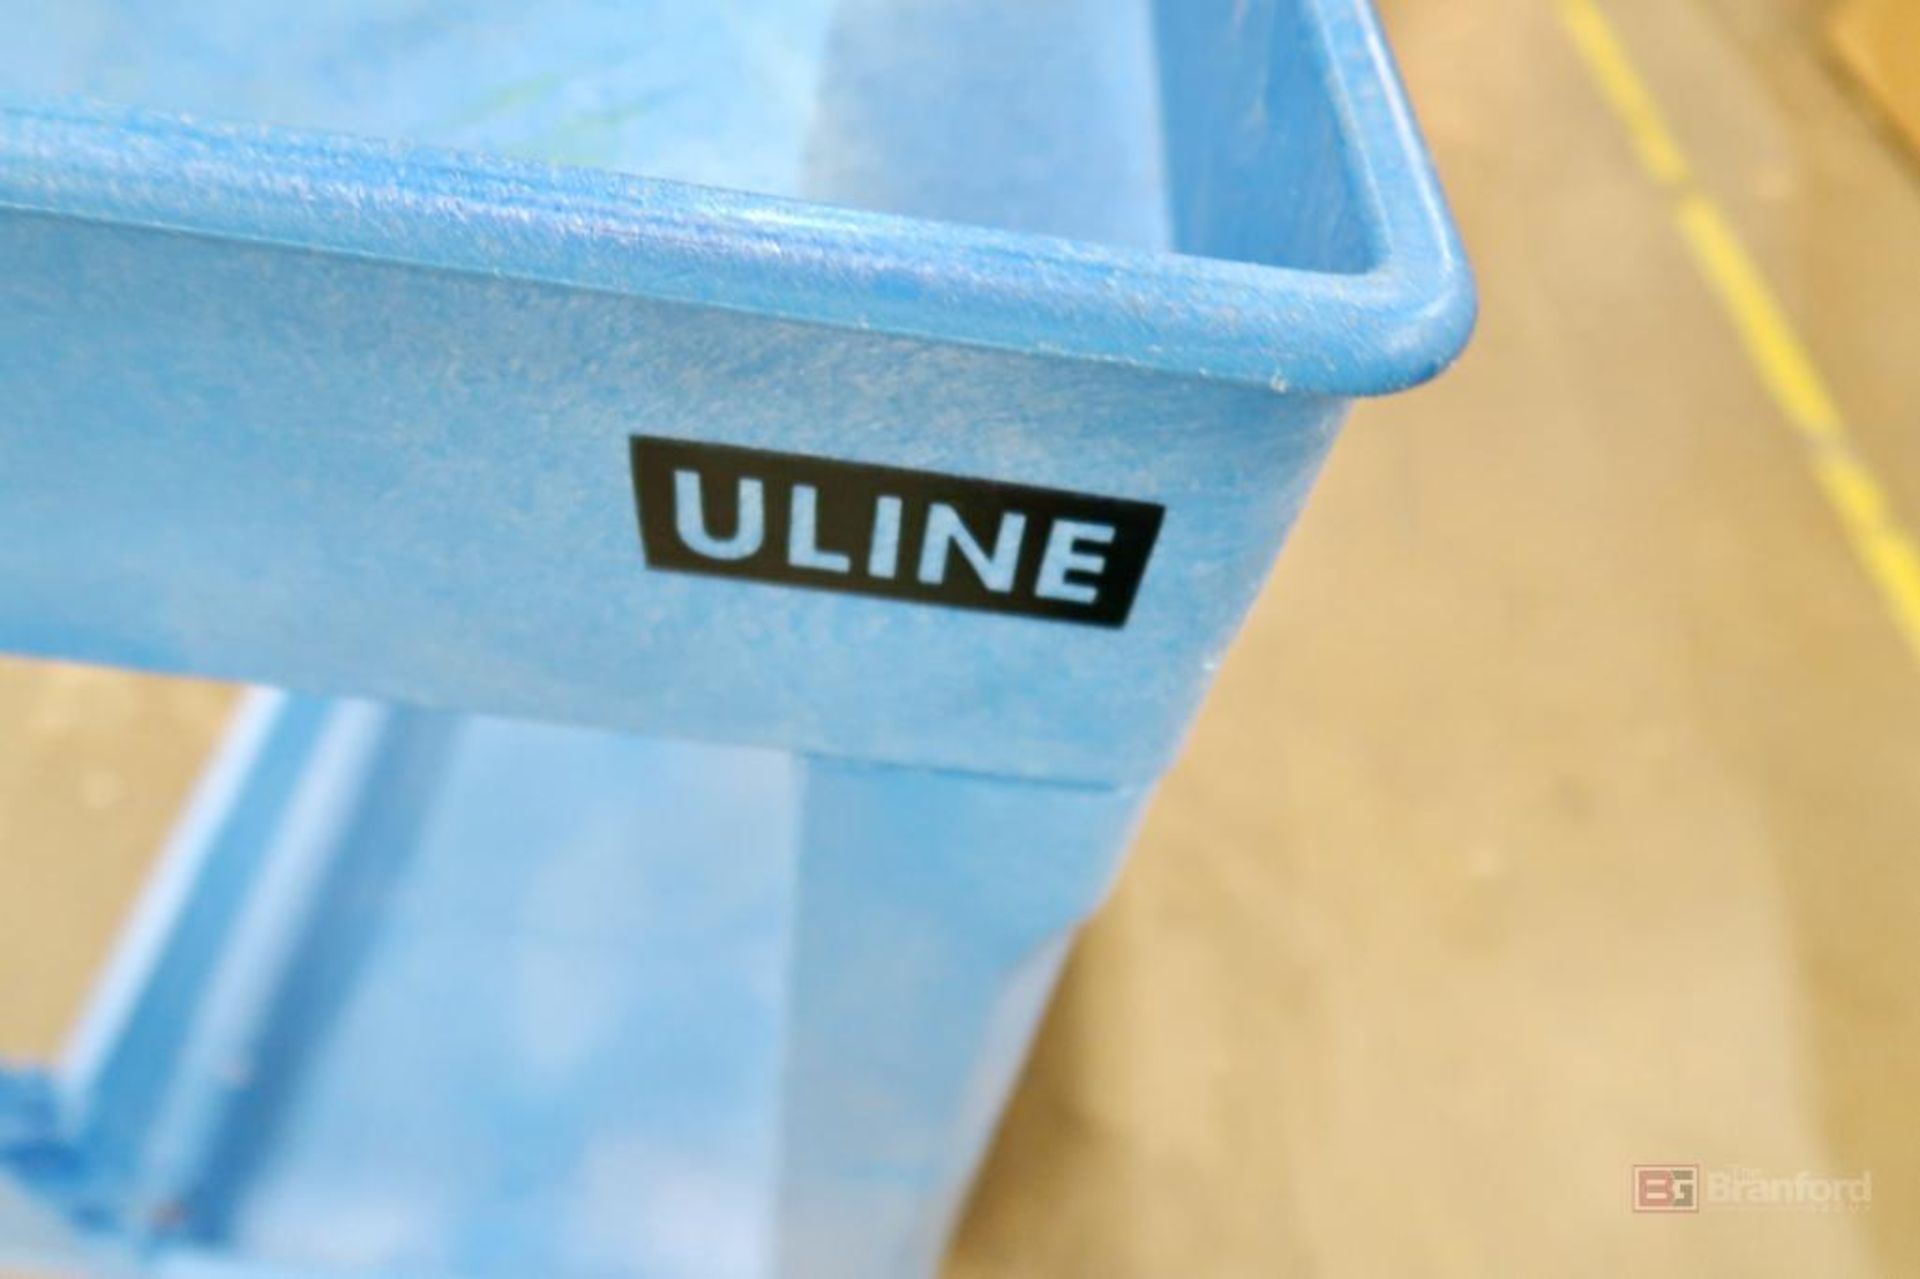 Uline Rubber Utility Cart - Image 2 of 2